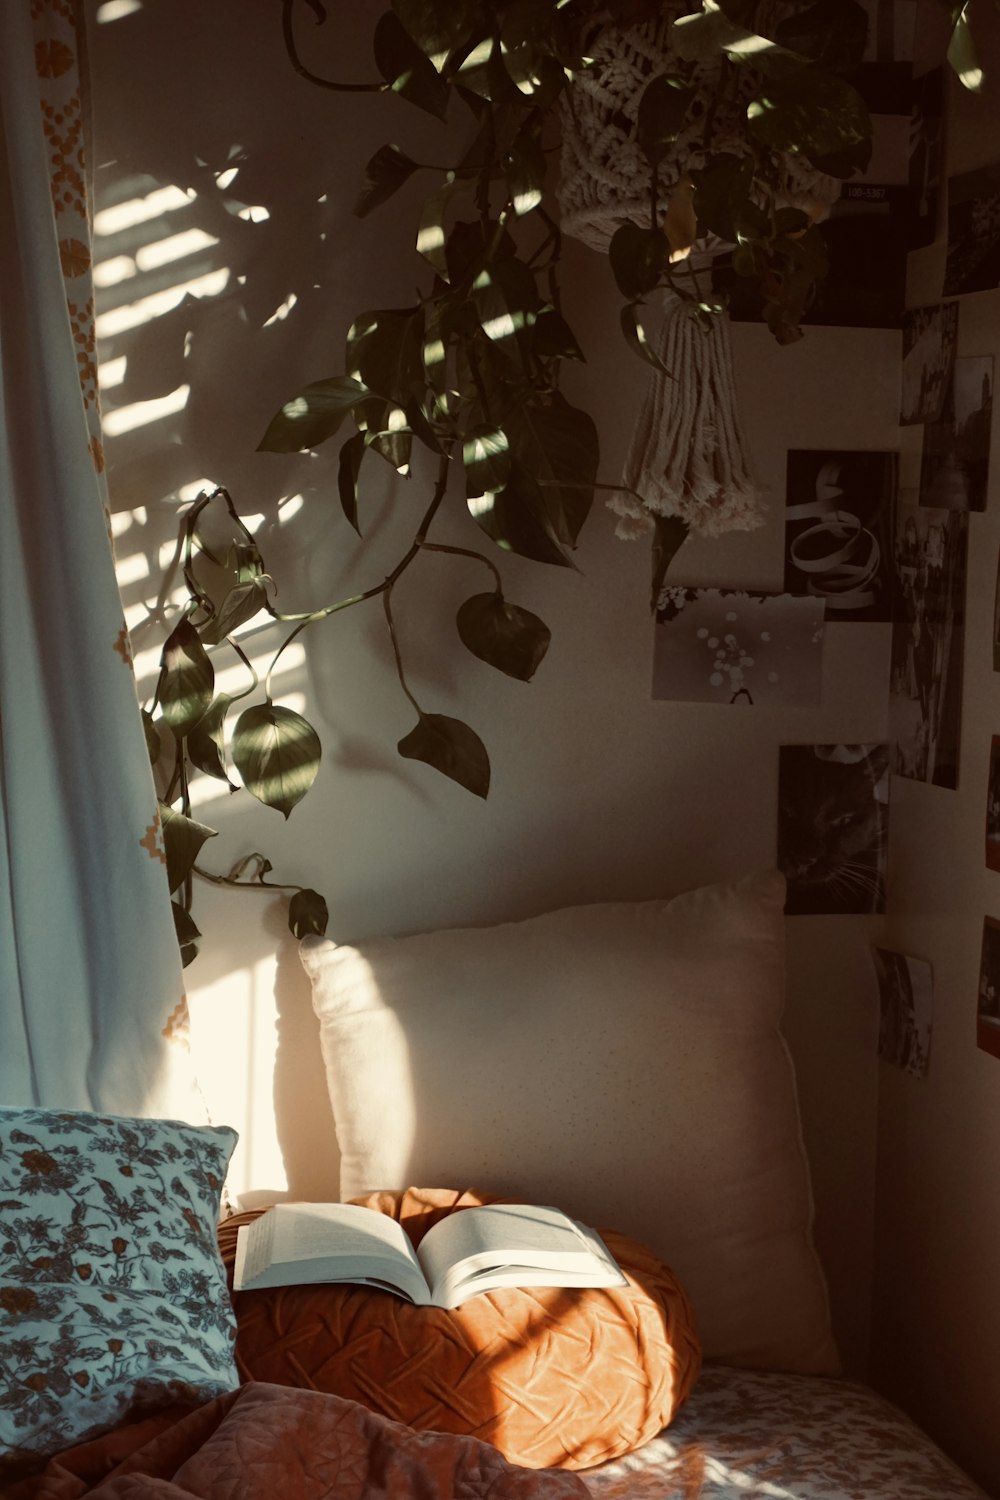 a bed with a book on top of it next to a window